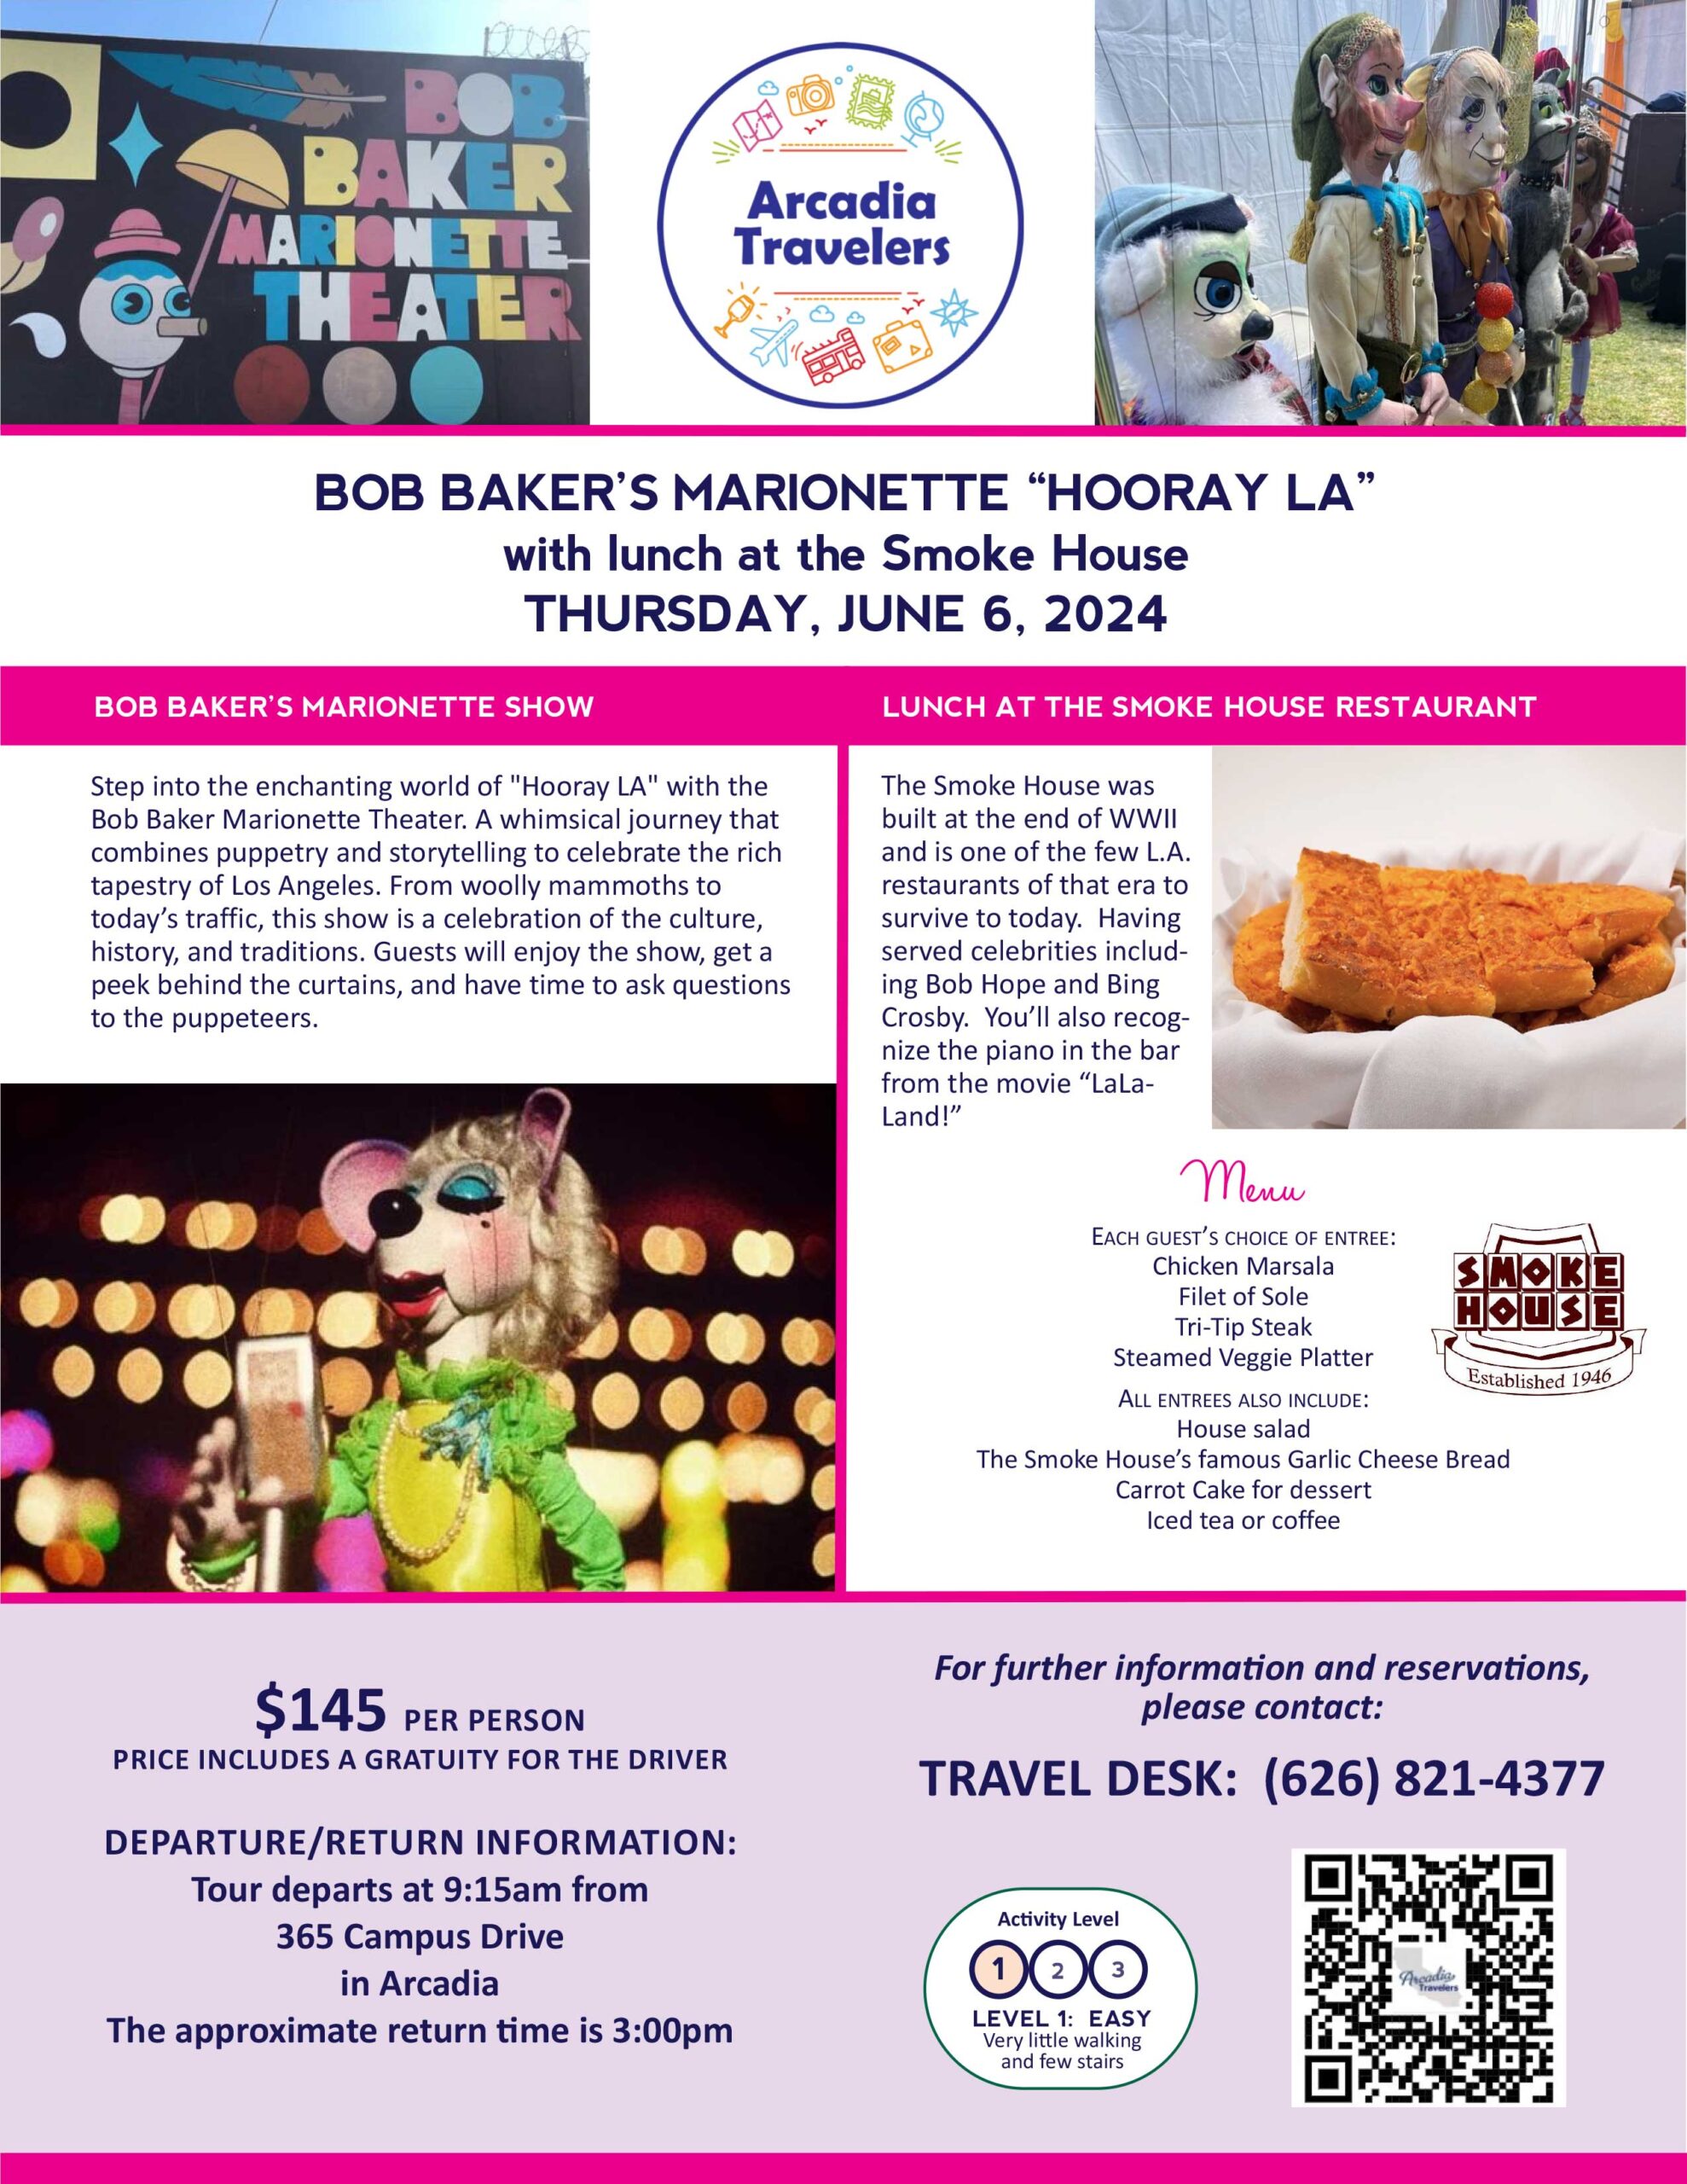 Arcadia Travelers tour featuring Bob Baker Marionette Theater on June 6, 2024